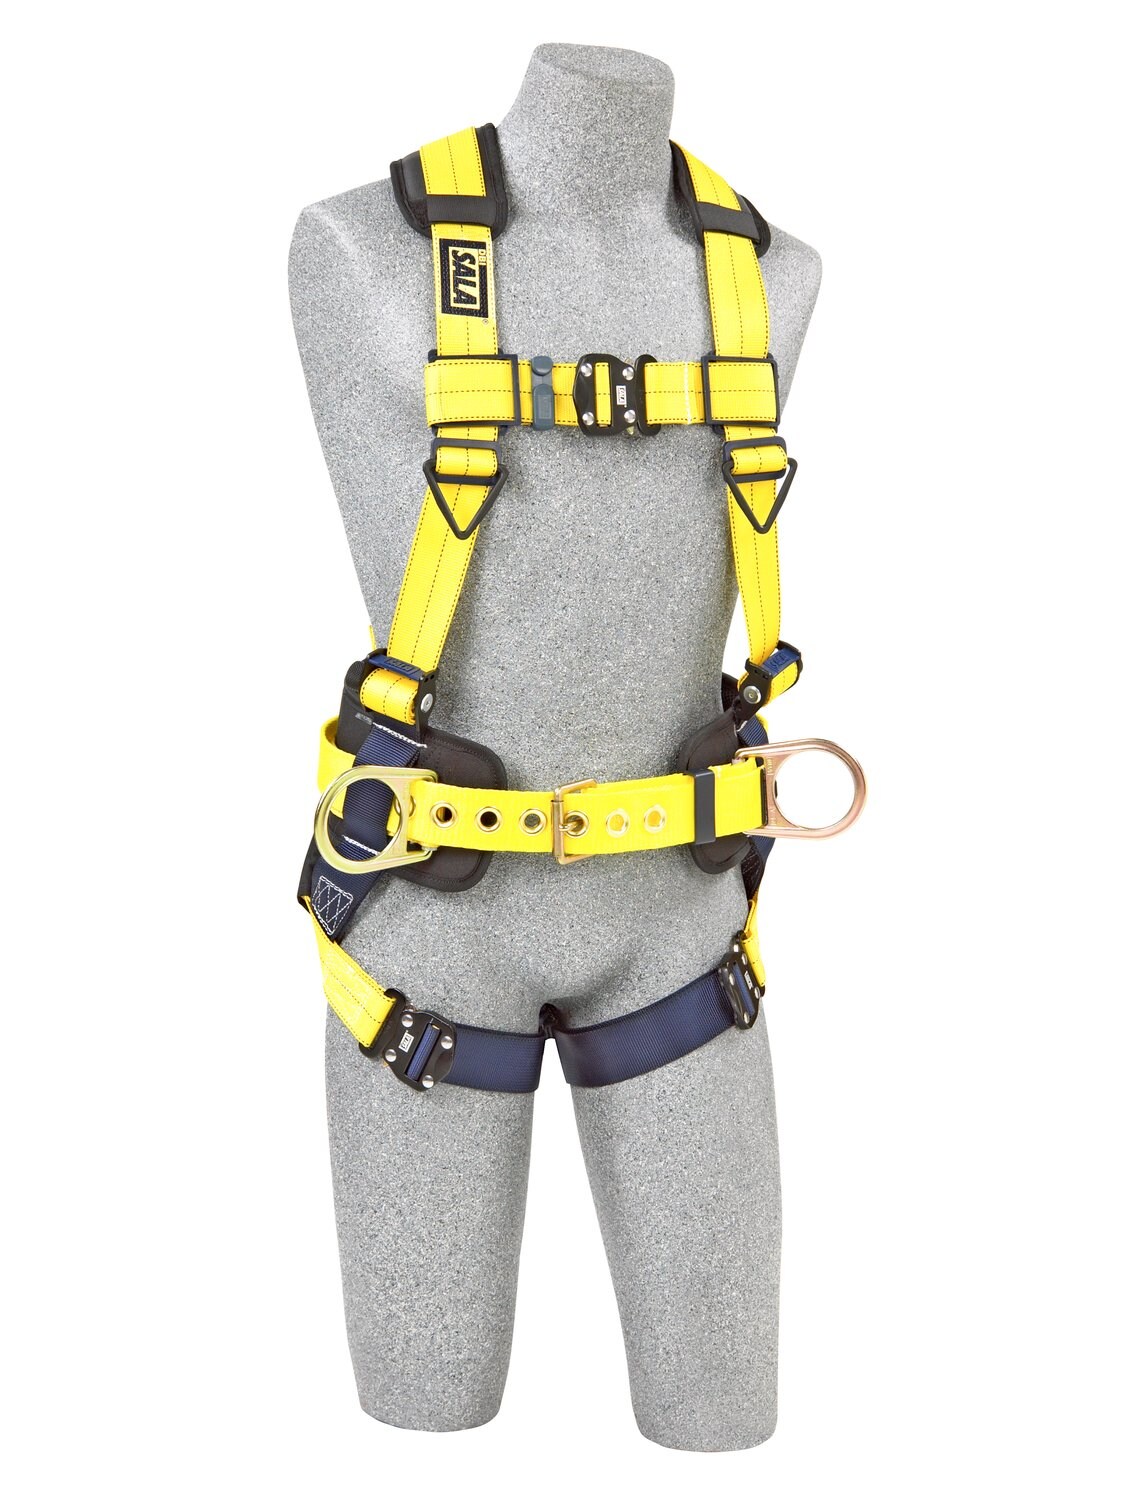 7012815708 - 3M DBI-SALA Delta Construction Positioning Safety Harness 1110578, X-Large